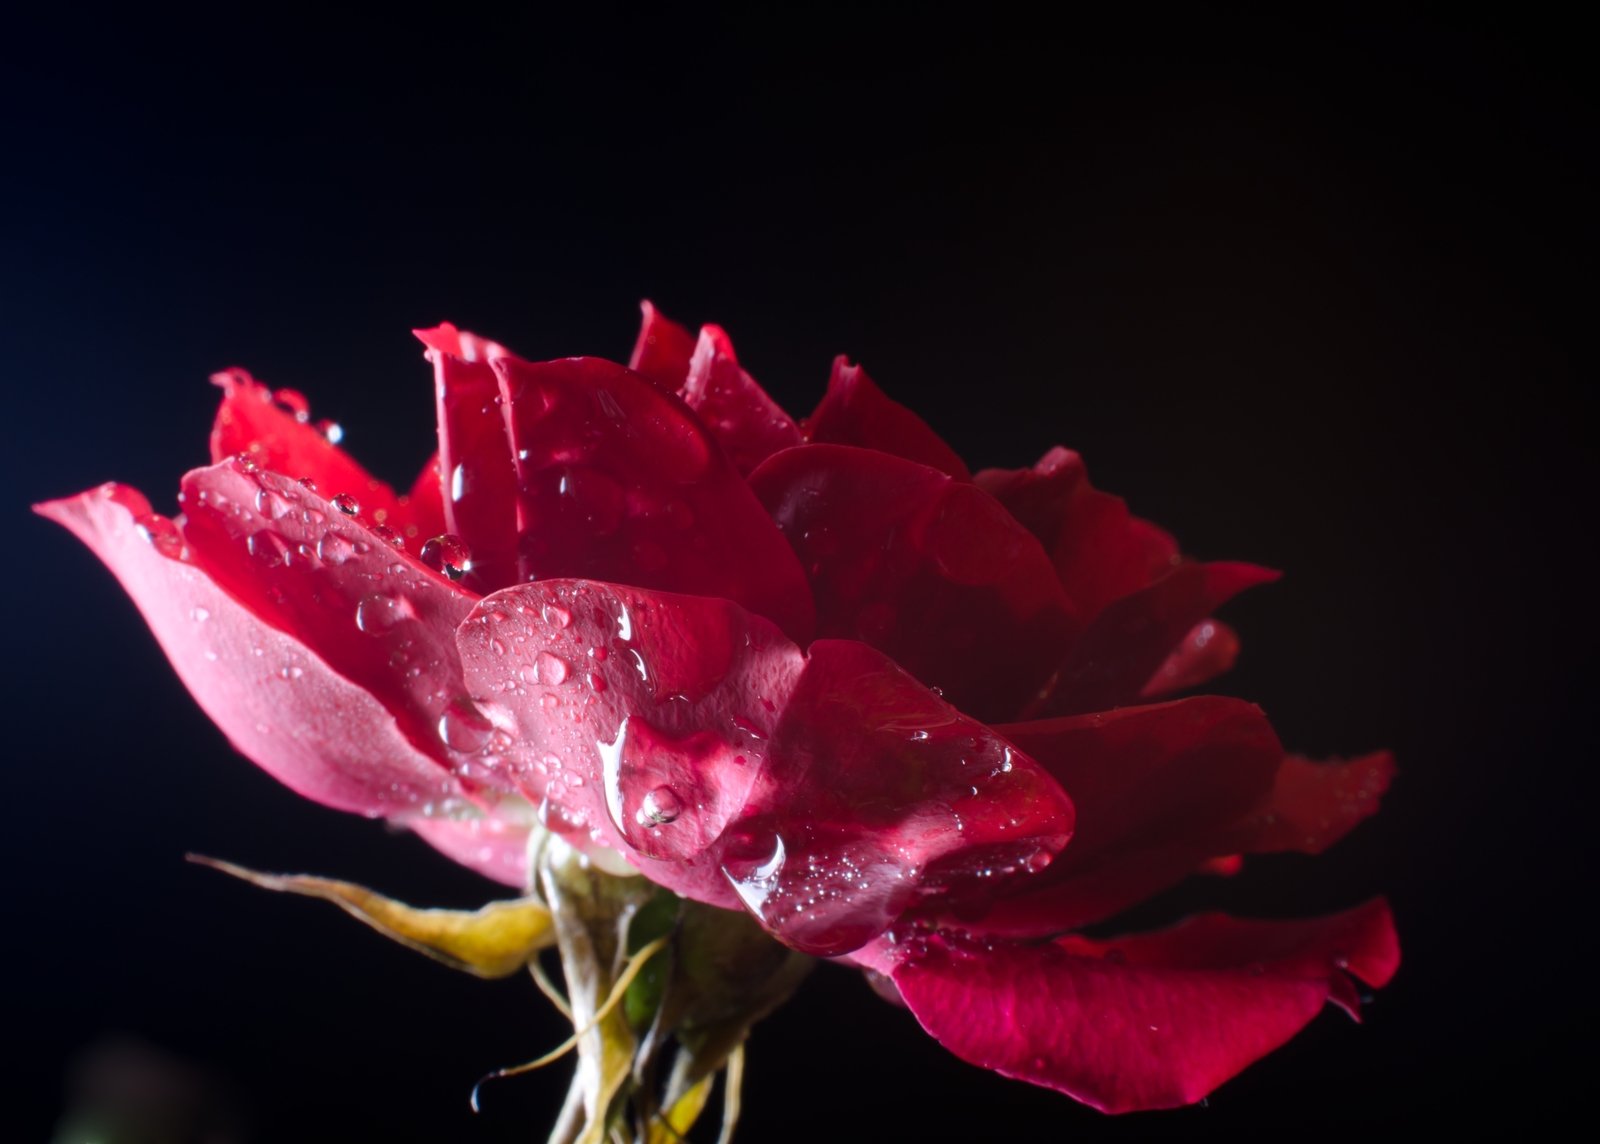 this is an image of a very pretty rose in the rain